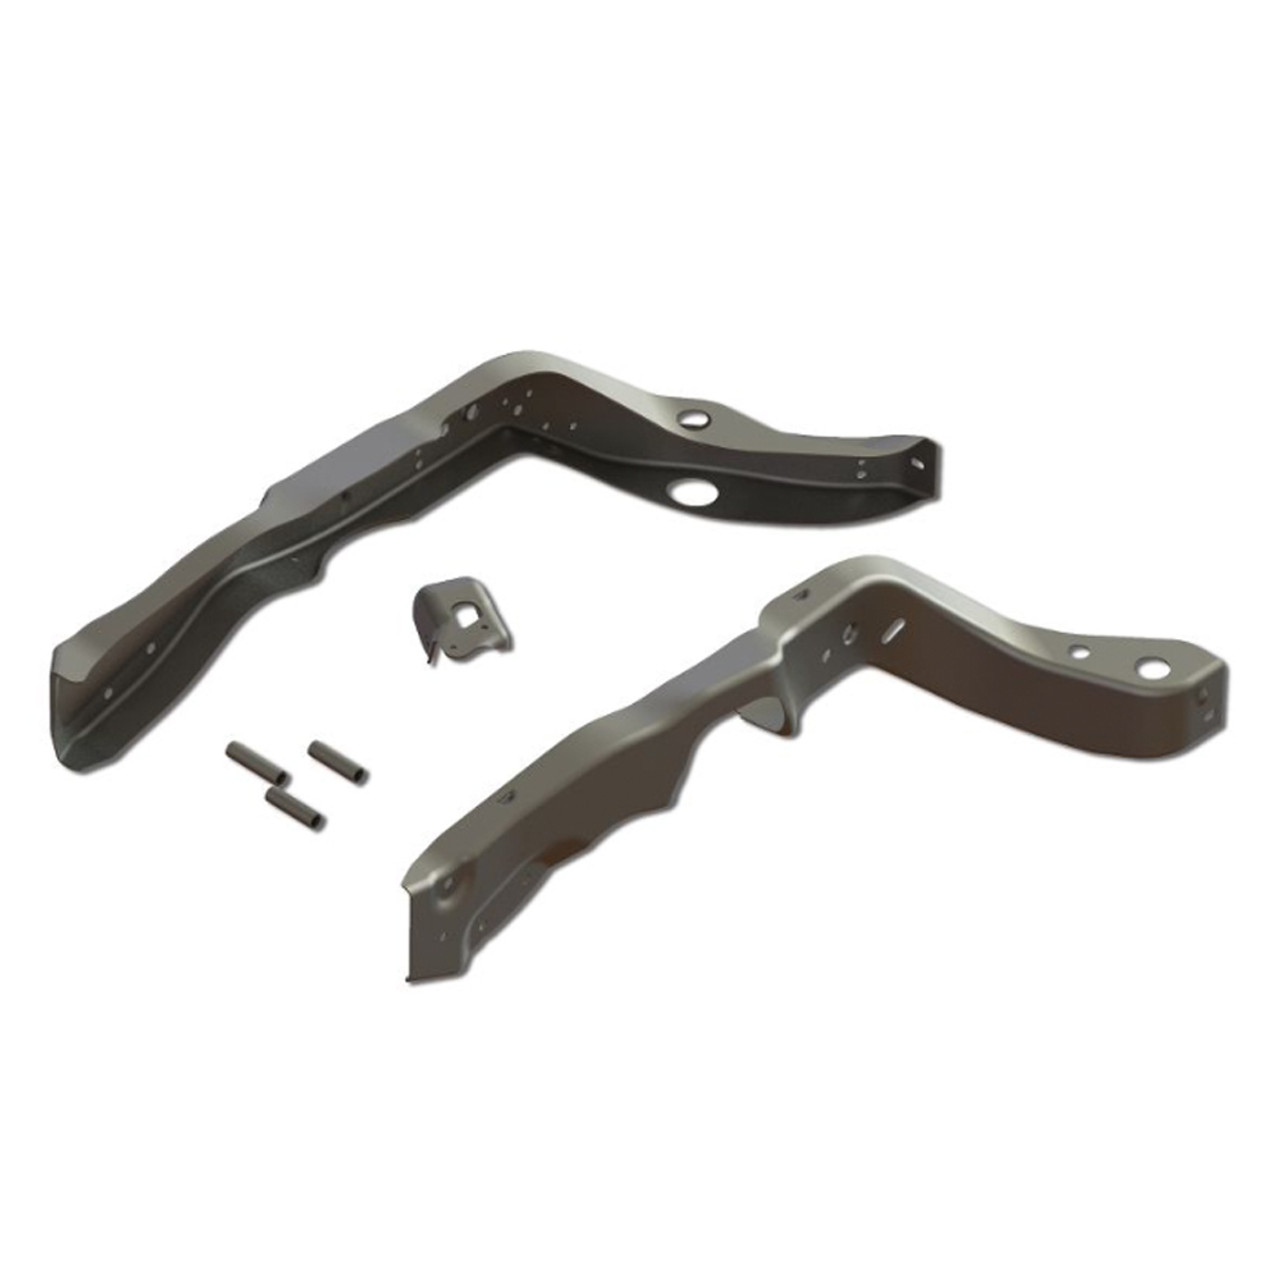 Chevelle LH Frame Horn Replacement Kit